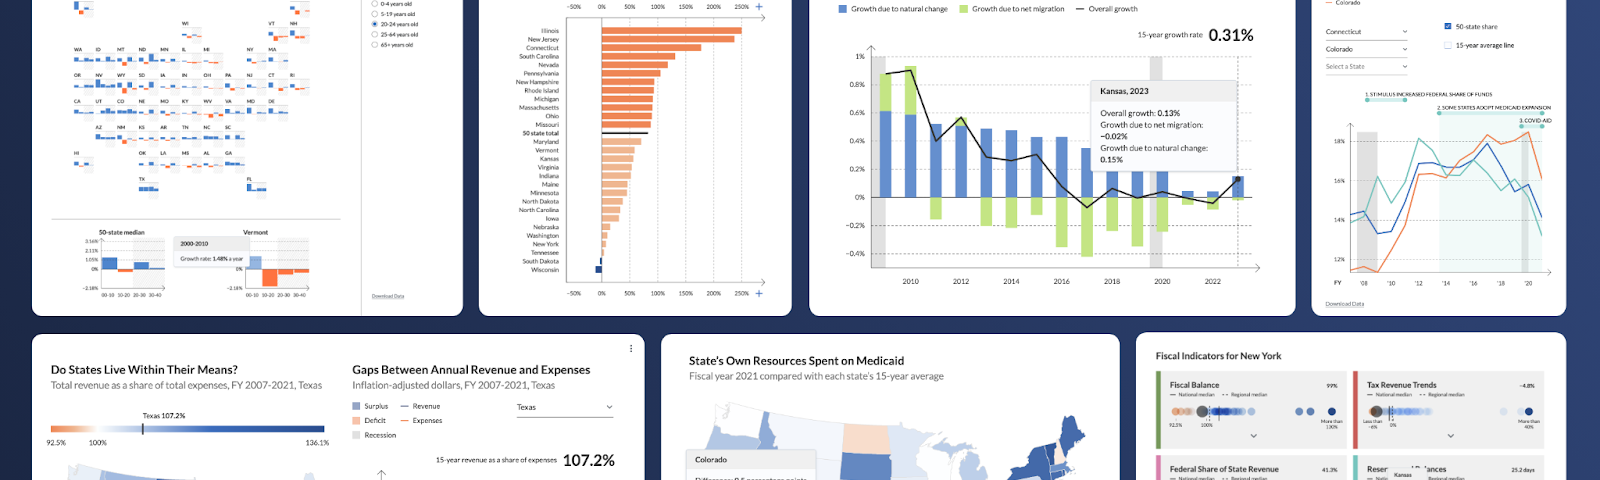 A collage of images showing data visualizations designed by Graphicacy, for Pew’s Fiscal 50 tool